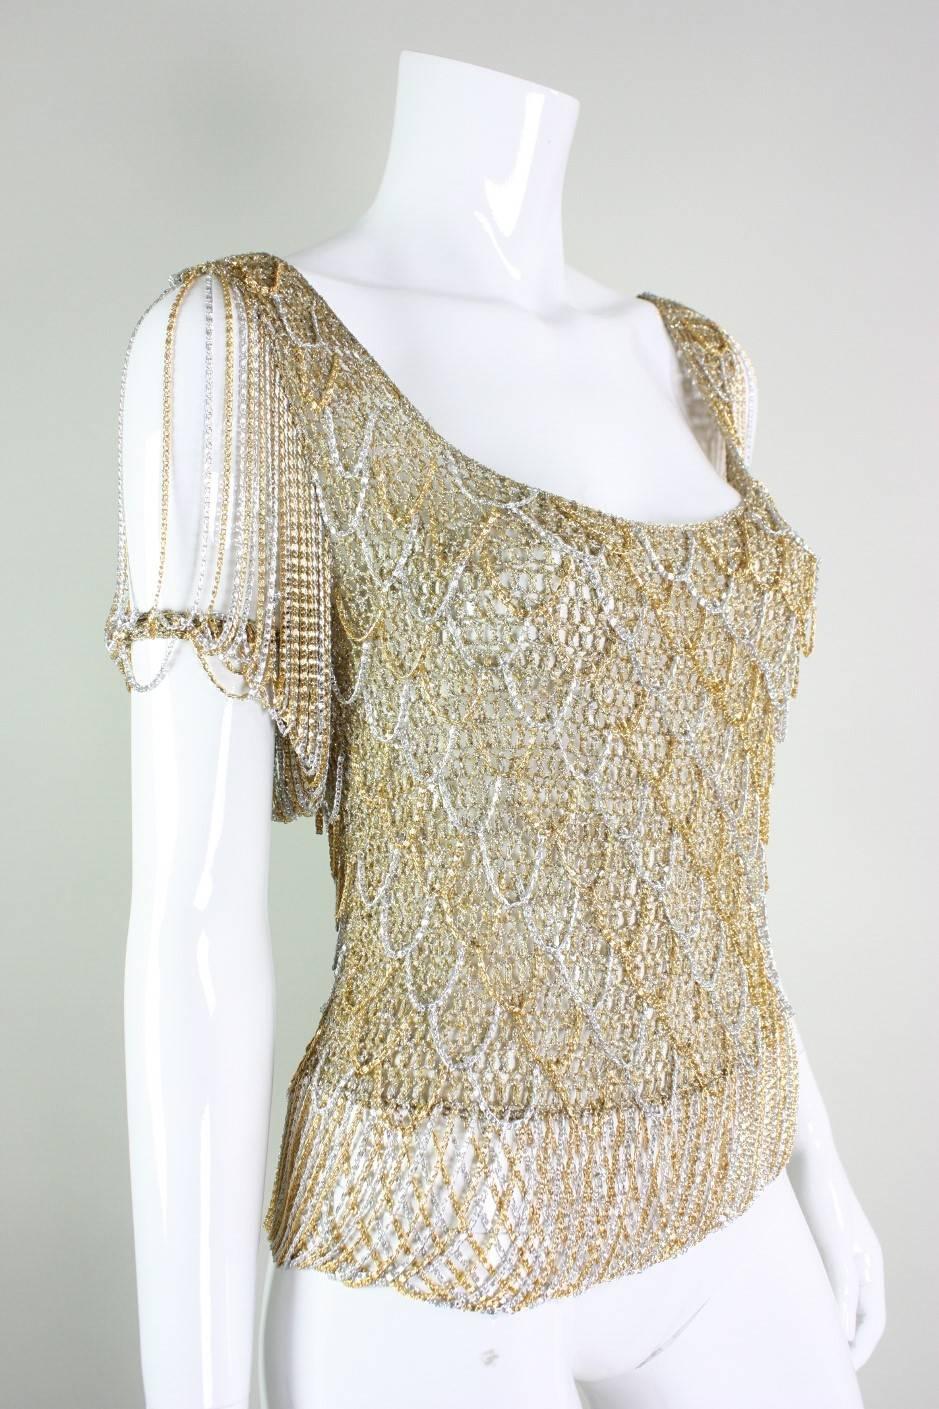 Loris Azzaro metallic gold sweater has silver and gold chain fringed accents and trim.  Deep cut front and back neck.  No closures. Unlined

Measurements-

Bust: 30-34